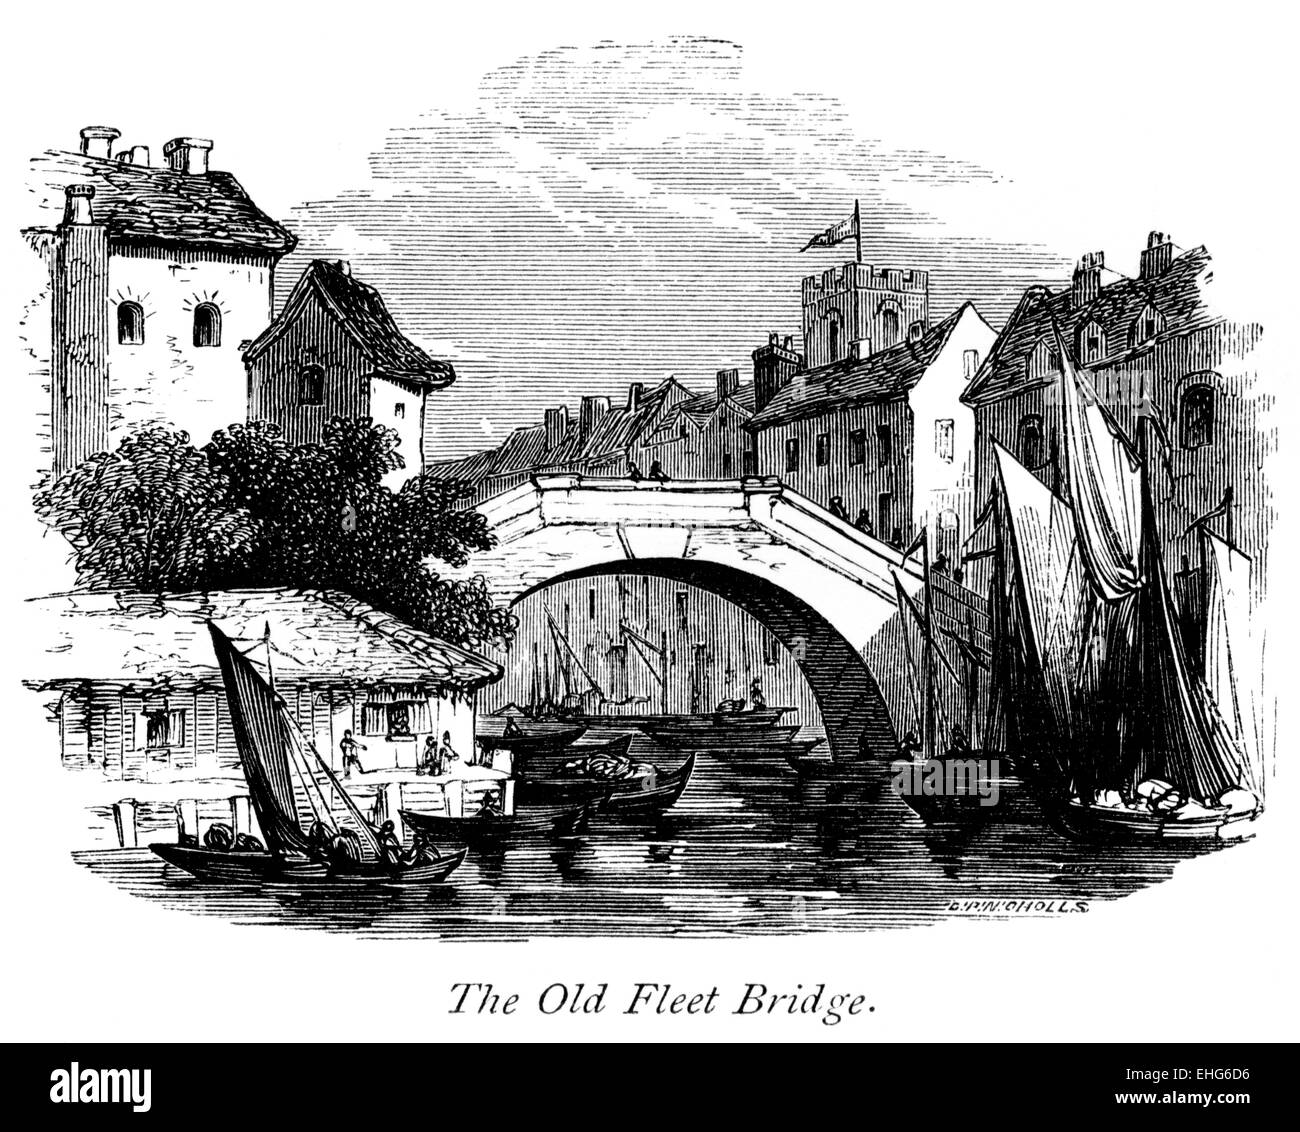 An engraving of The Old Fleet Bridge, London scanned at high resolution from a book printed in 1867. Stock Photo